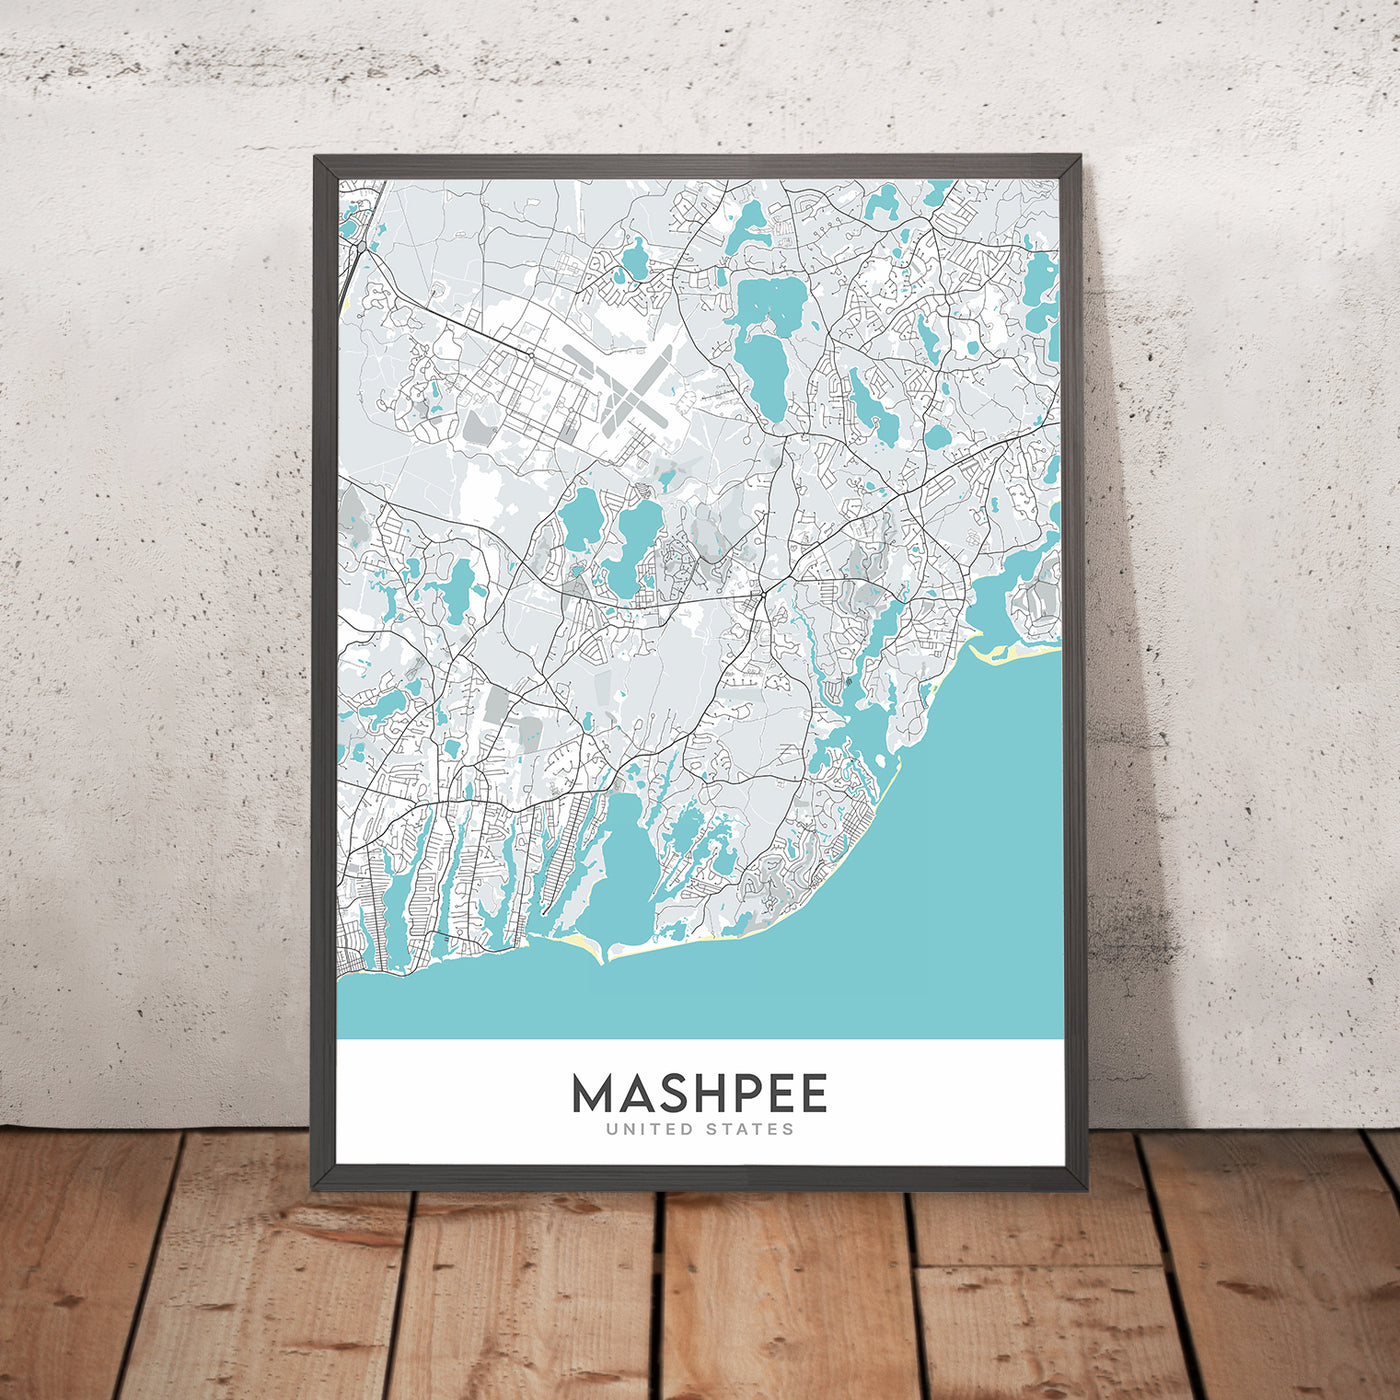 Modern City Map of Mashpee, MA: Commons, South Cape Beach State Park, Waquoit Bay Reserve, Popponesset Beach, Santuit Pond